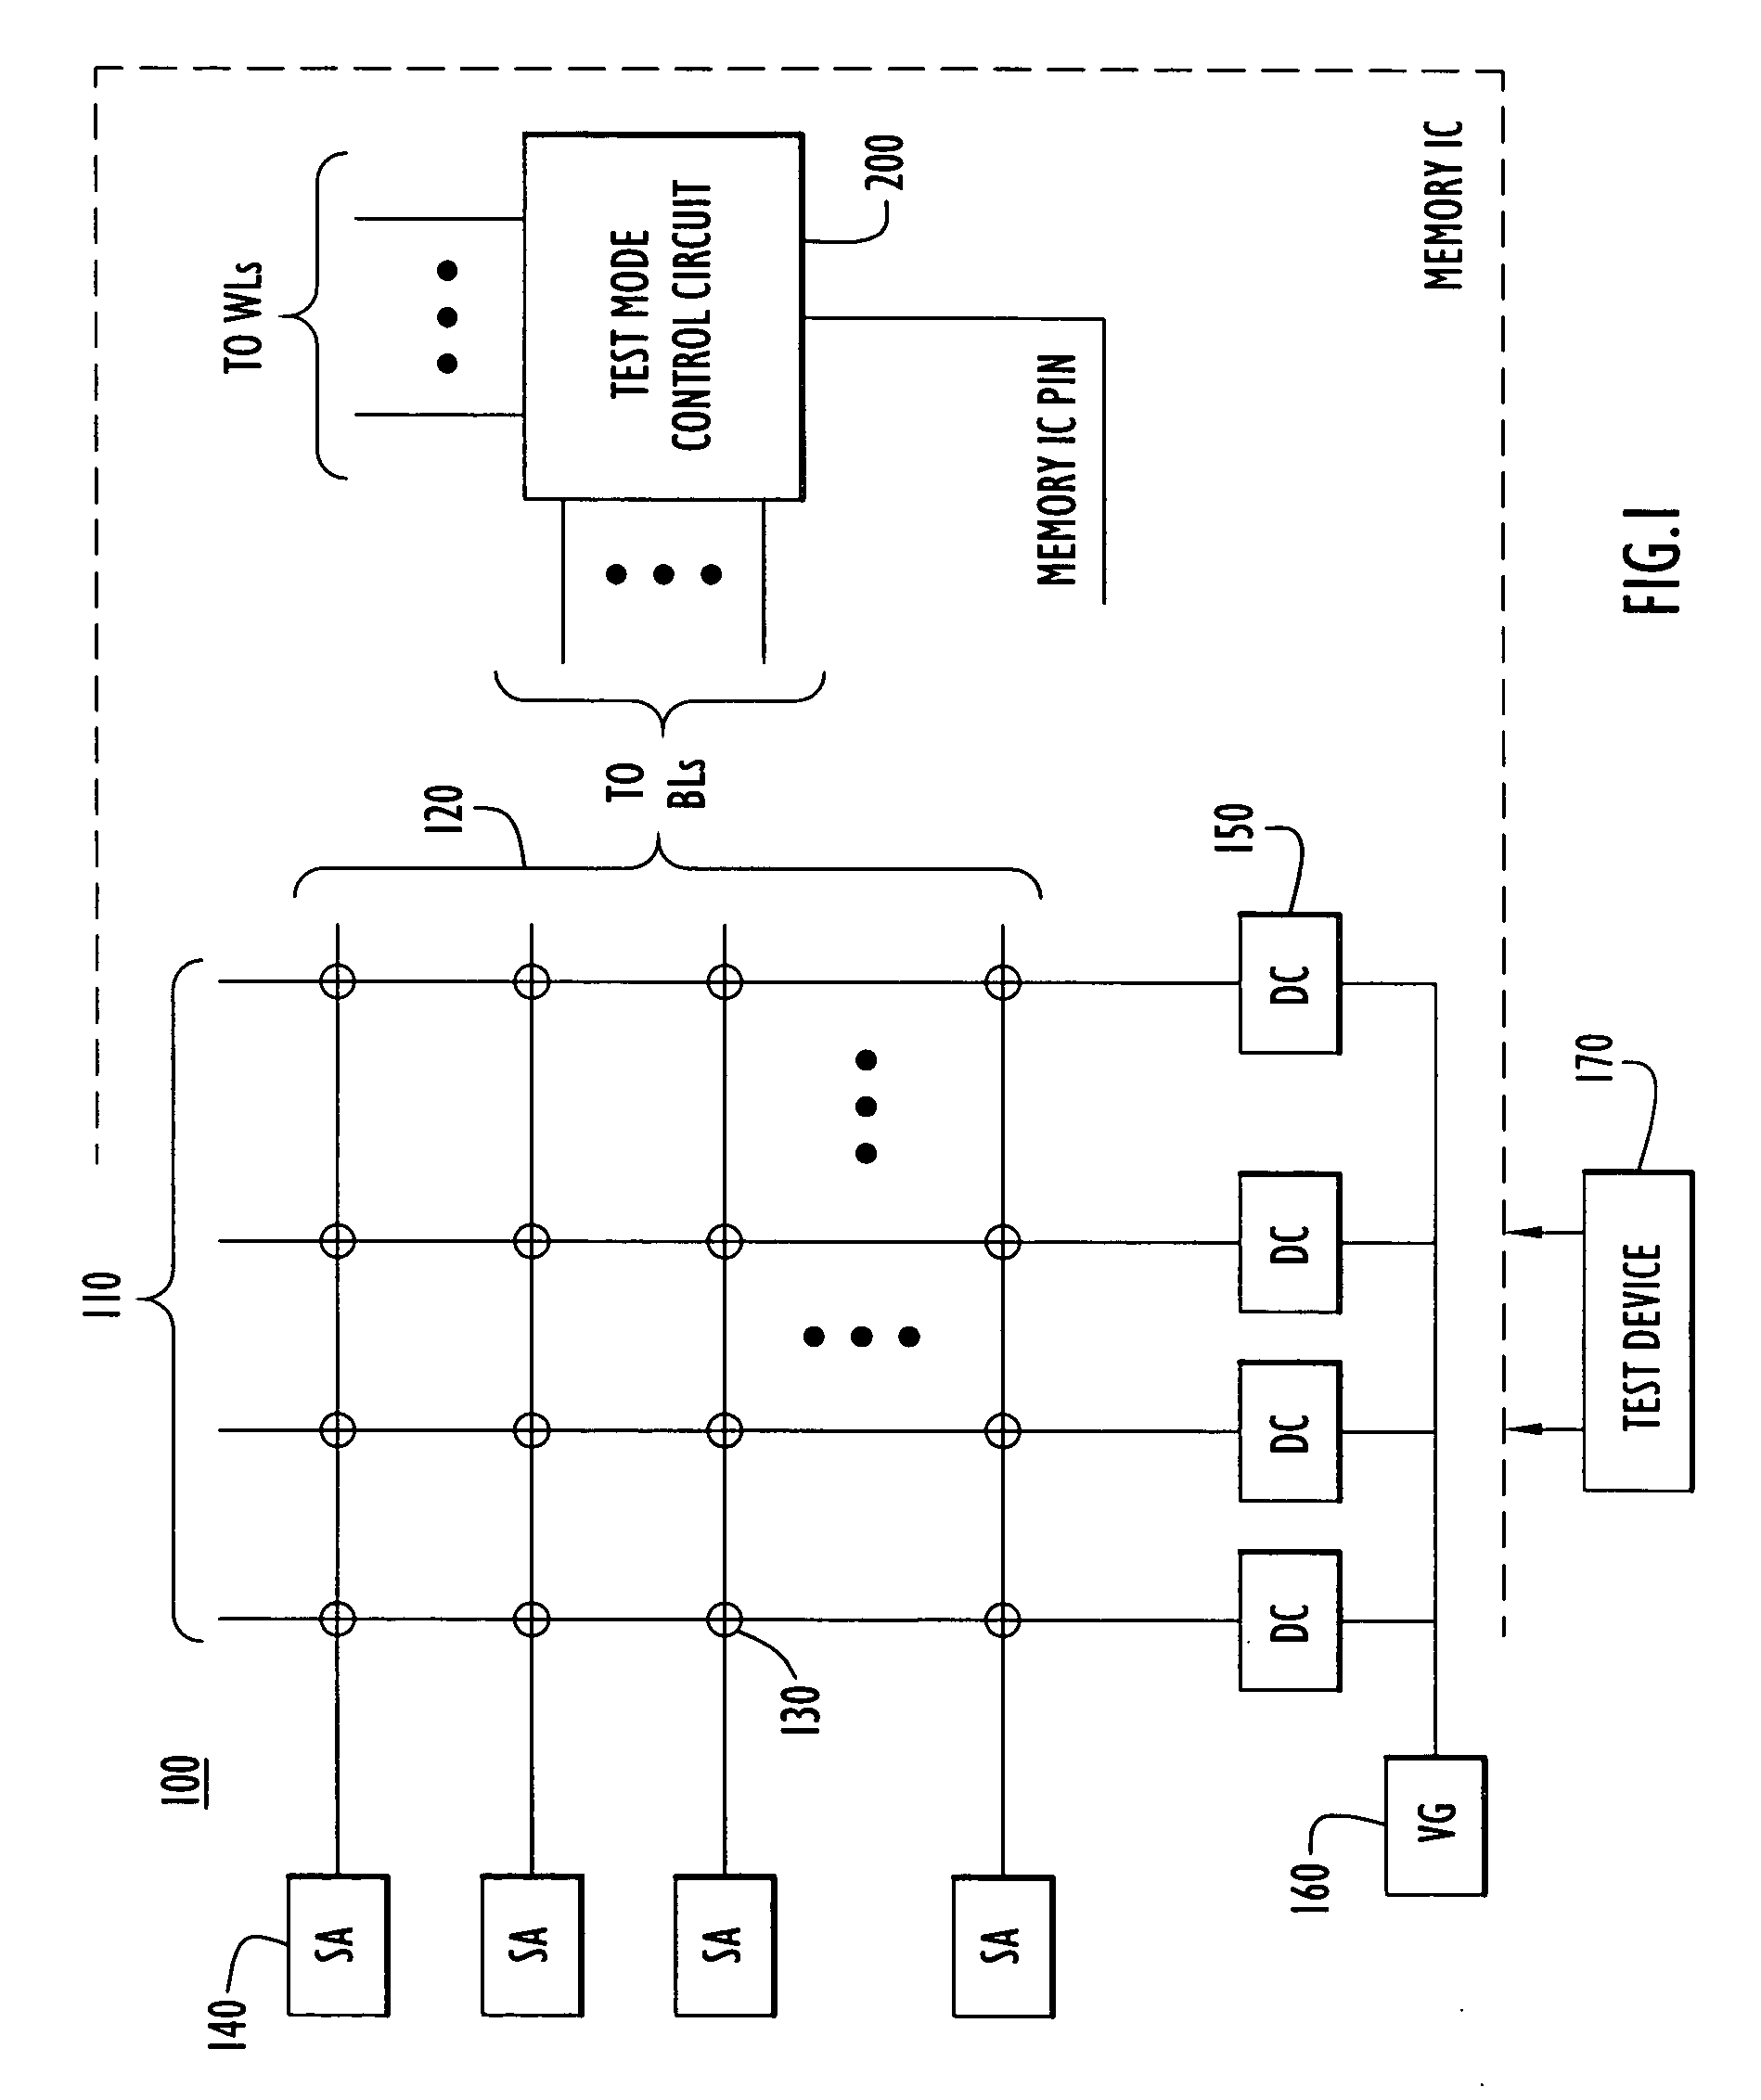 Test method, control circuit and system for reduced time combined write window and retention testing